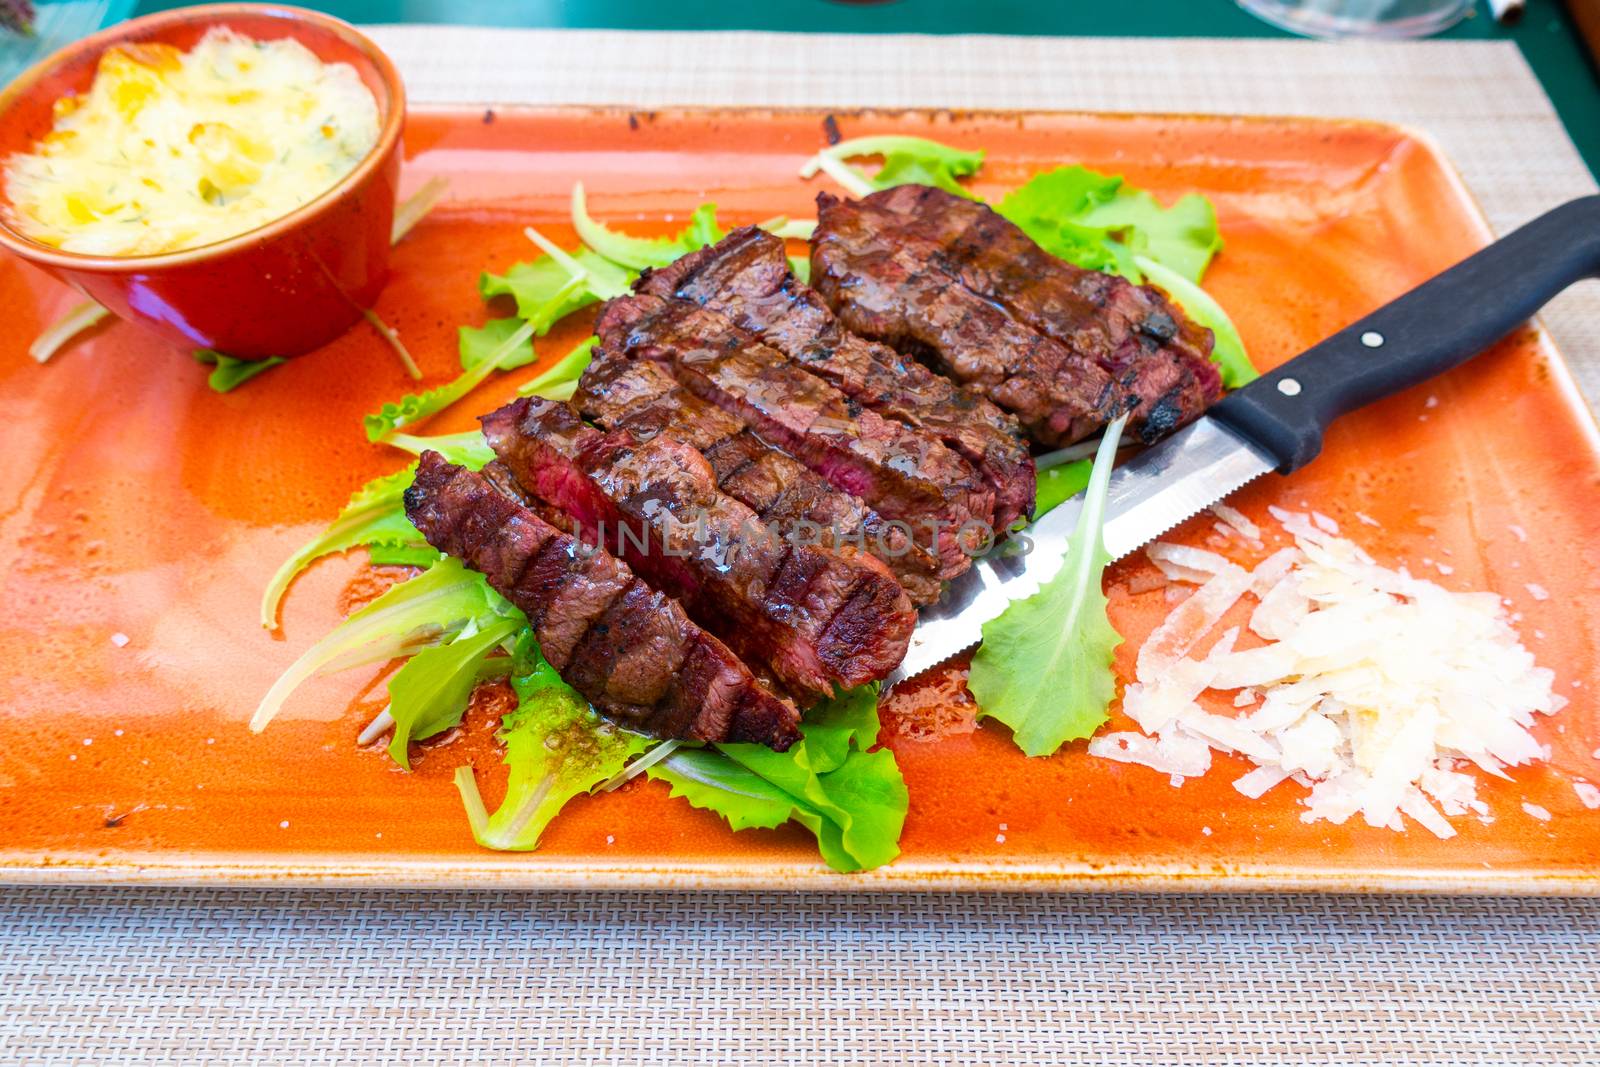 Traditional Italian Tagliata Steak with Parmesan and Salad as close-up on a plate with steak knife and side dish in small pot